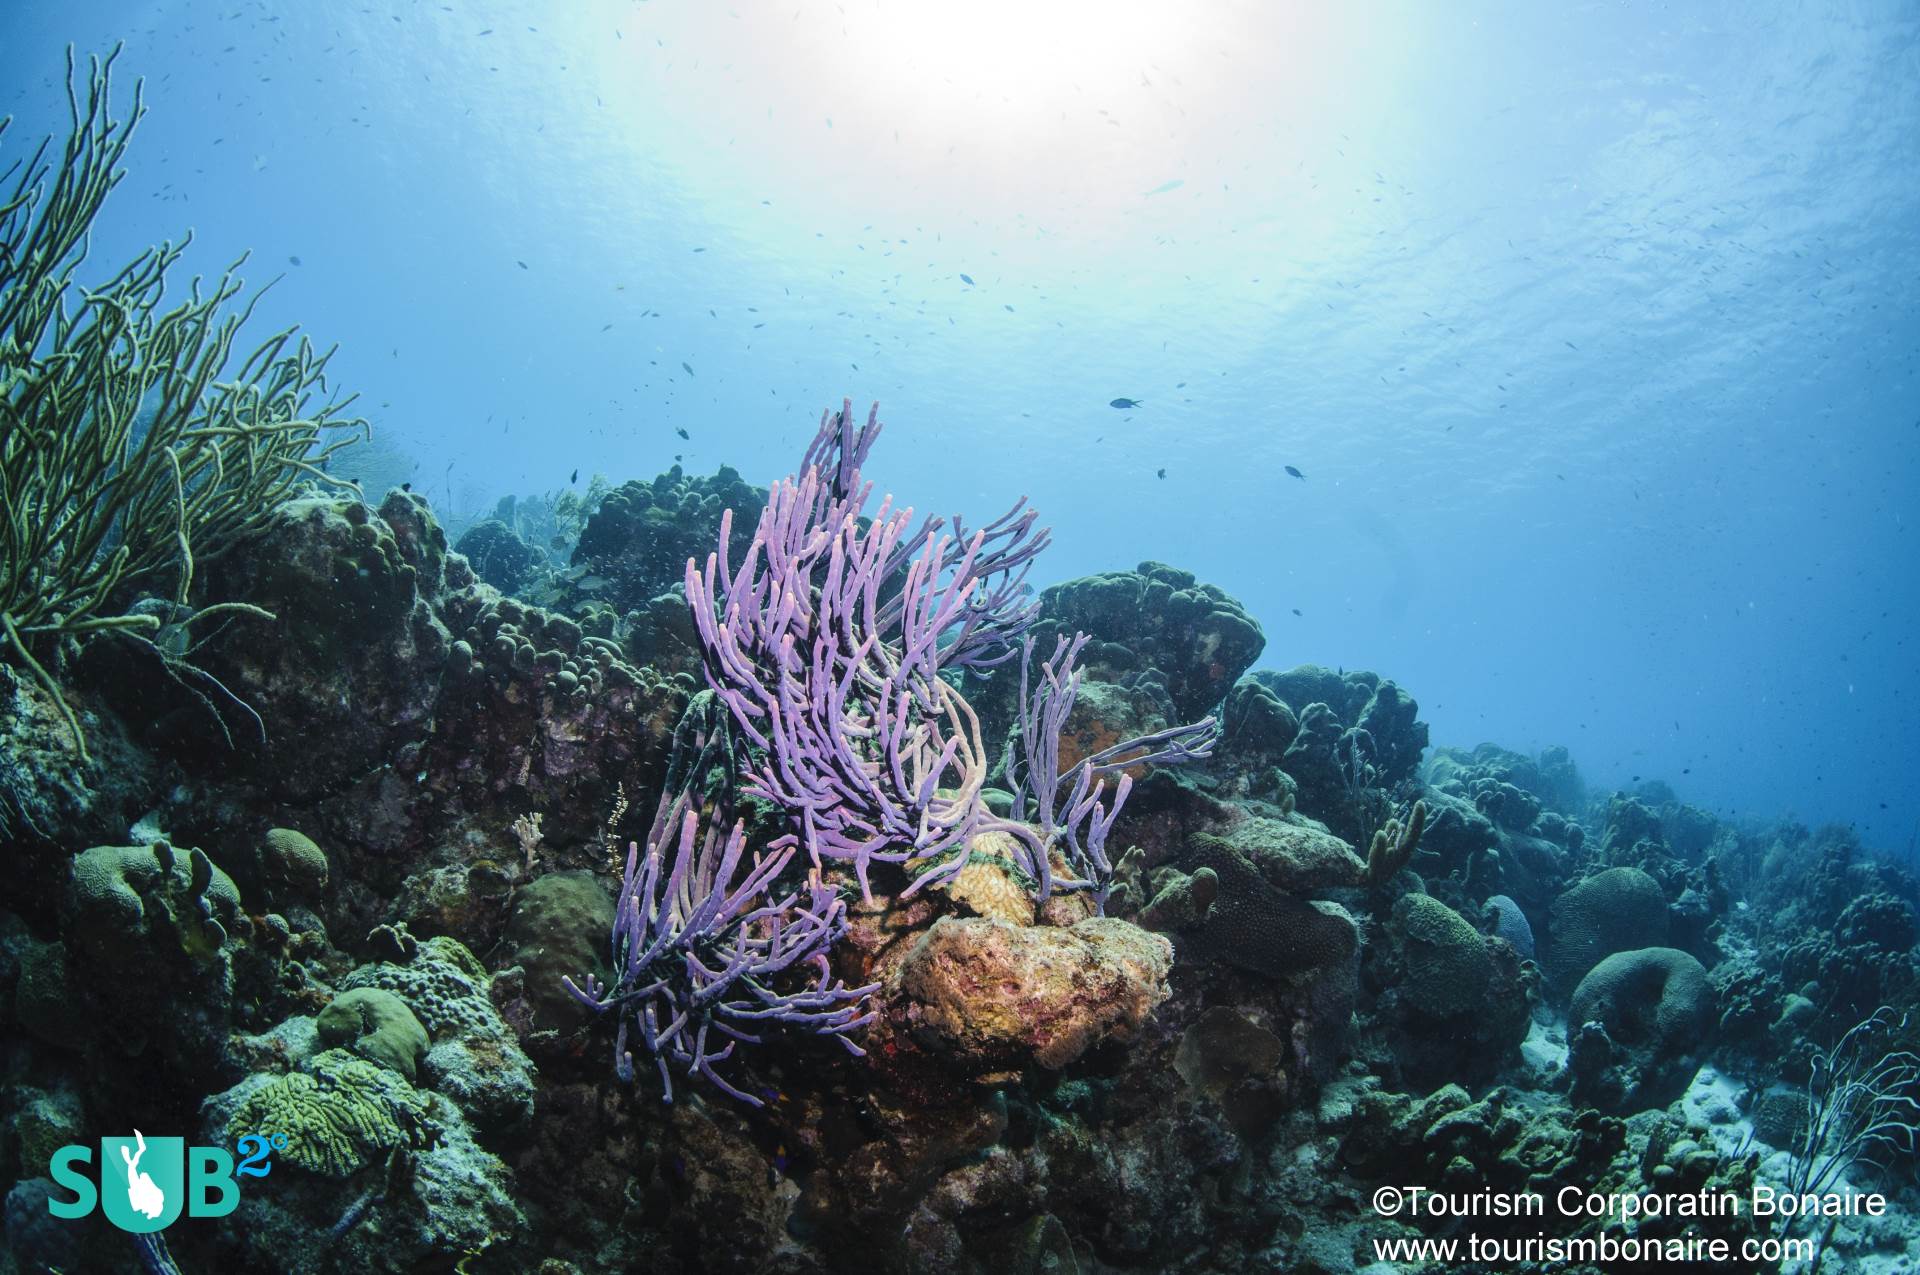 Purple rope sponge sways in the gentle current, as reef fish flit around the coral substrate. The diving in Bonaire is spectacular; divers often return to the island, time and again, to experience the scenic sites.